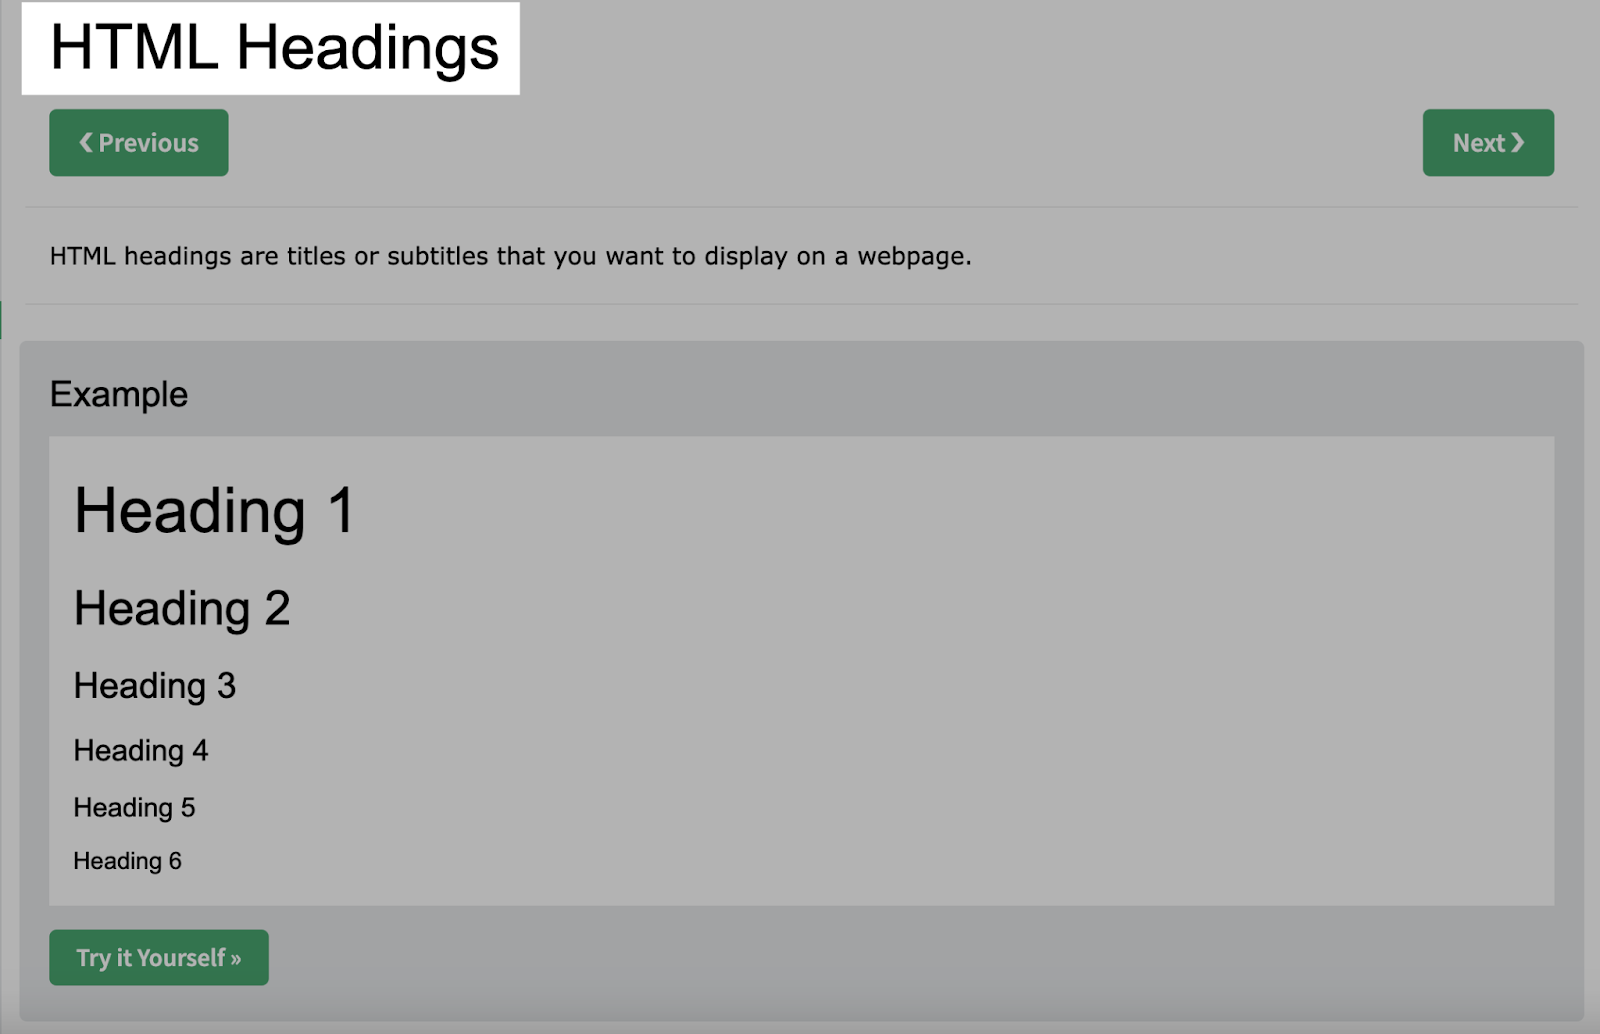 W3Schools’ tutorial H1 tag that reads: "HTML Headings"